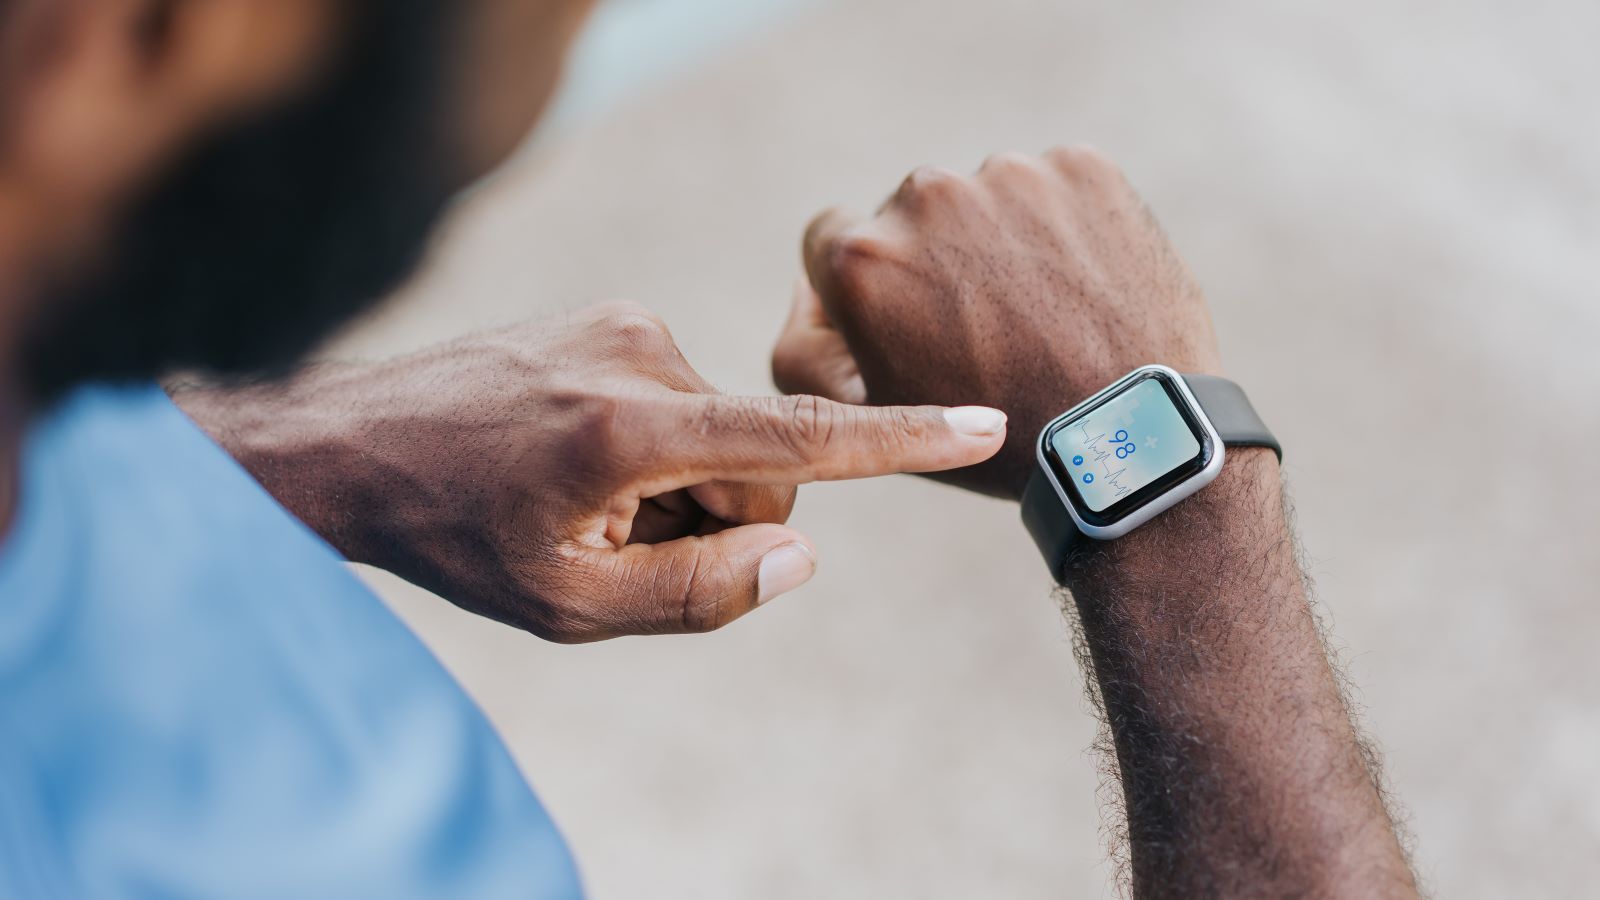 We asked an expert if a smartwatch or ring that measures your blood sugar level are worth your time. Here's what she had to say.